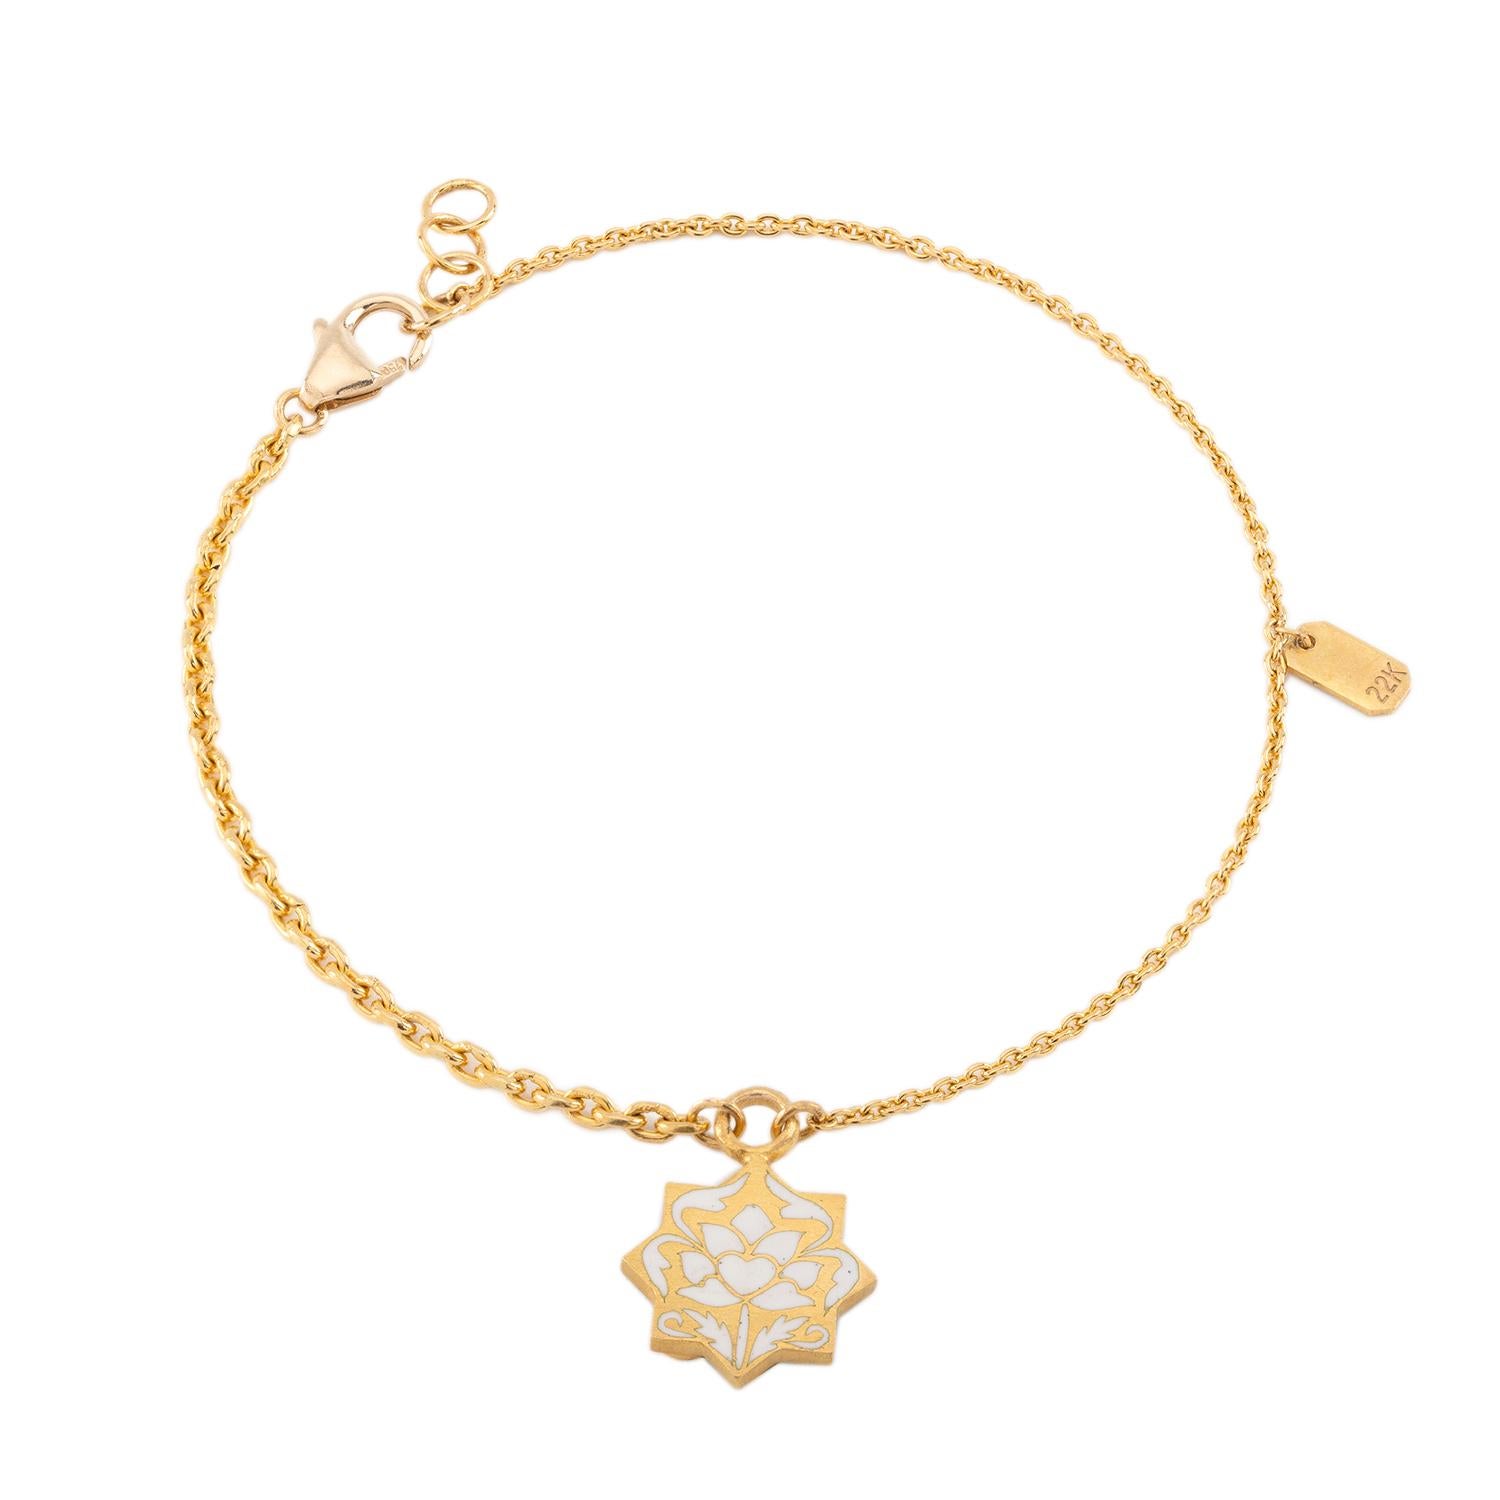 The 'Jasmine Garden' 8-Point Star Reversible Initial Charm Bracelet is not just a piece of jewelry—it is a modern heirloom that encapsulates the power of self-expression, a tangible representation of your individuality, and a precious keepsake to be